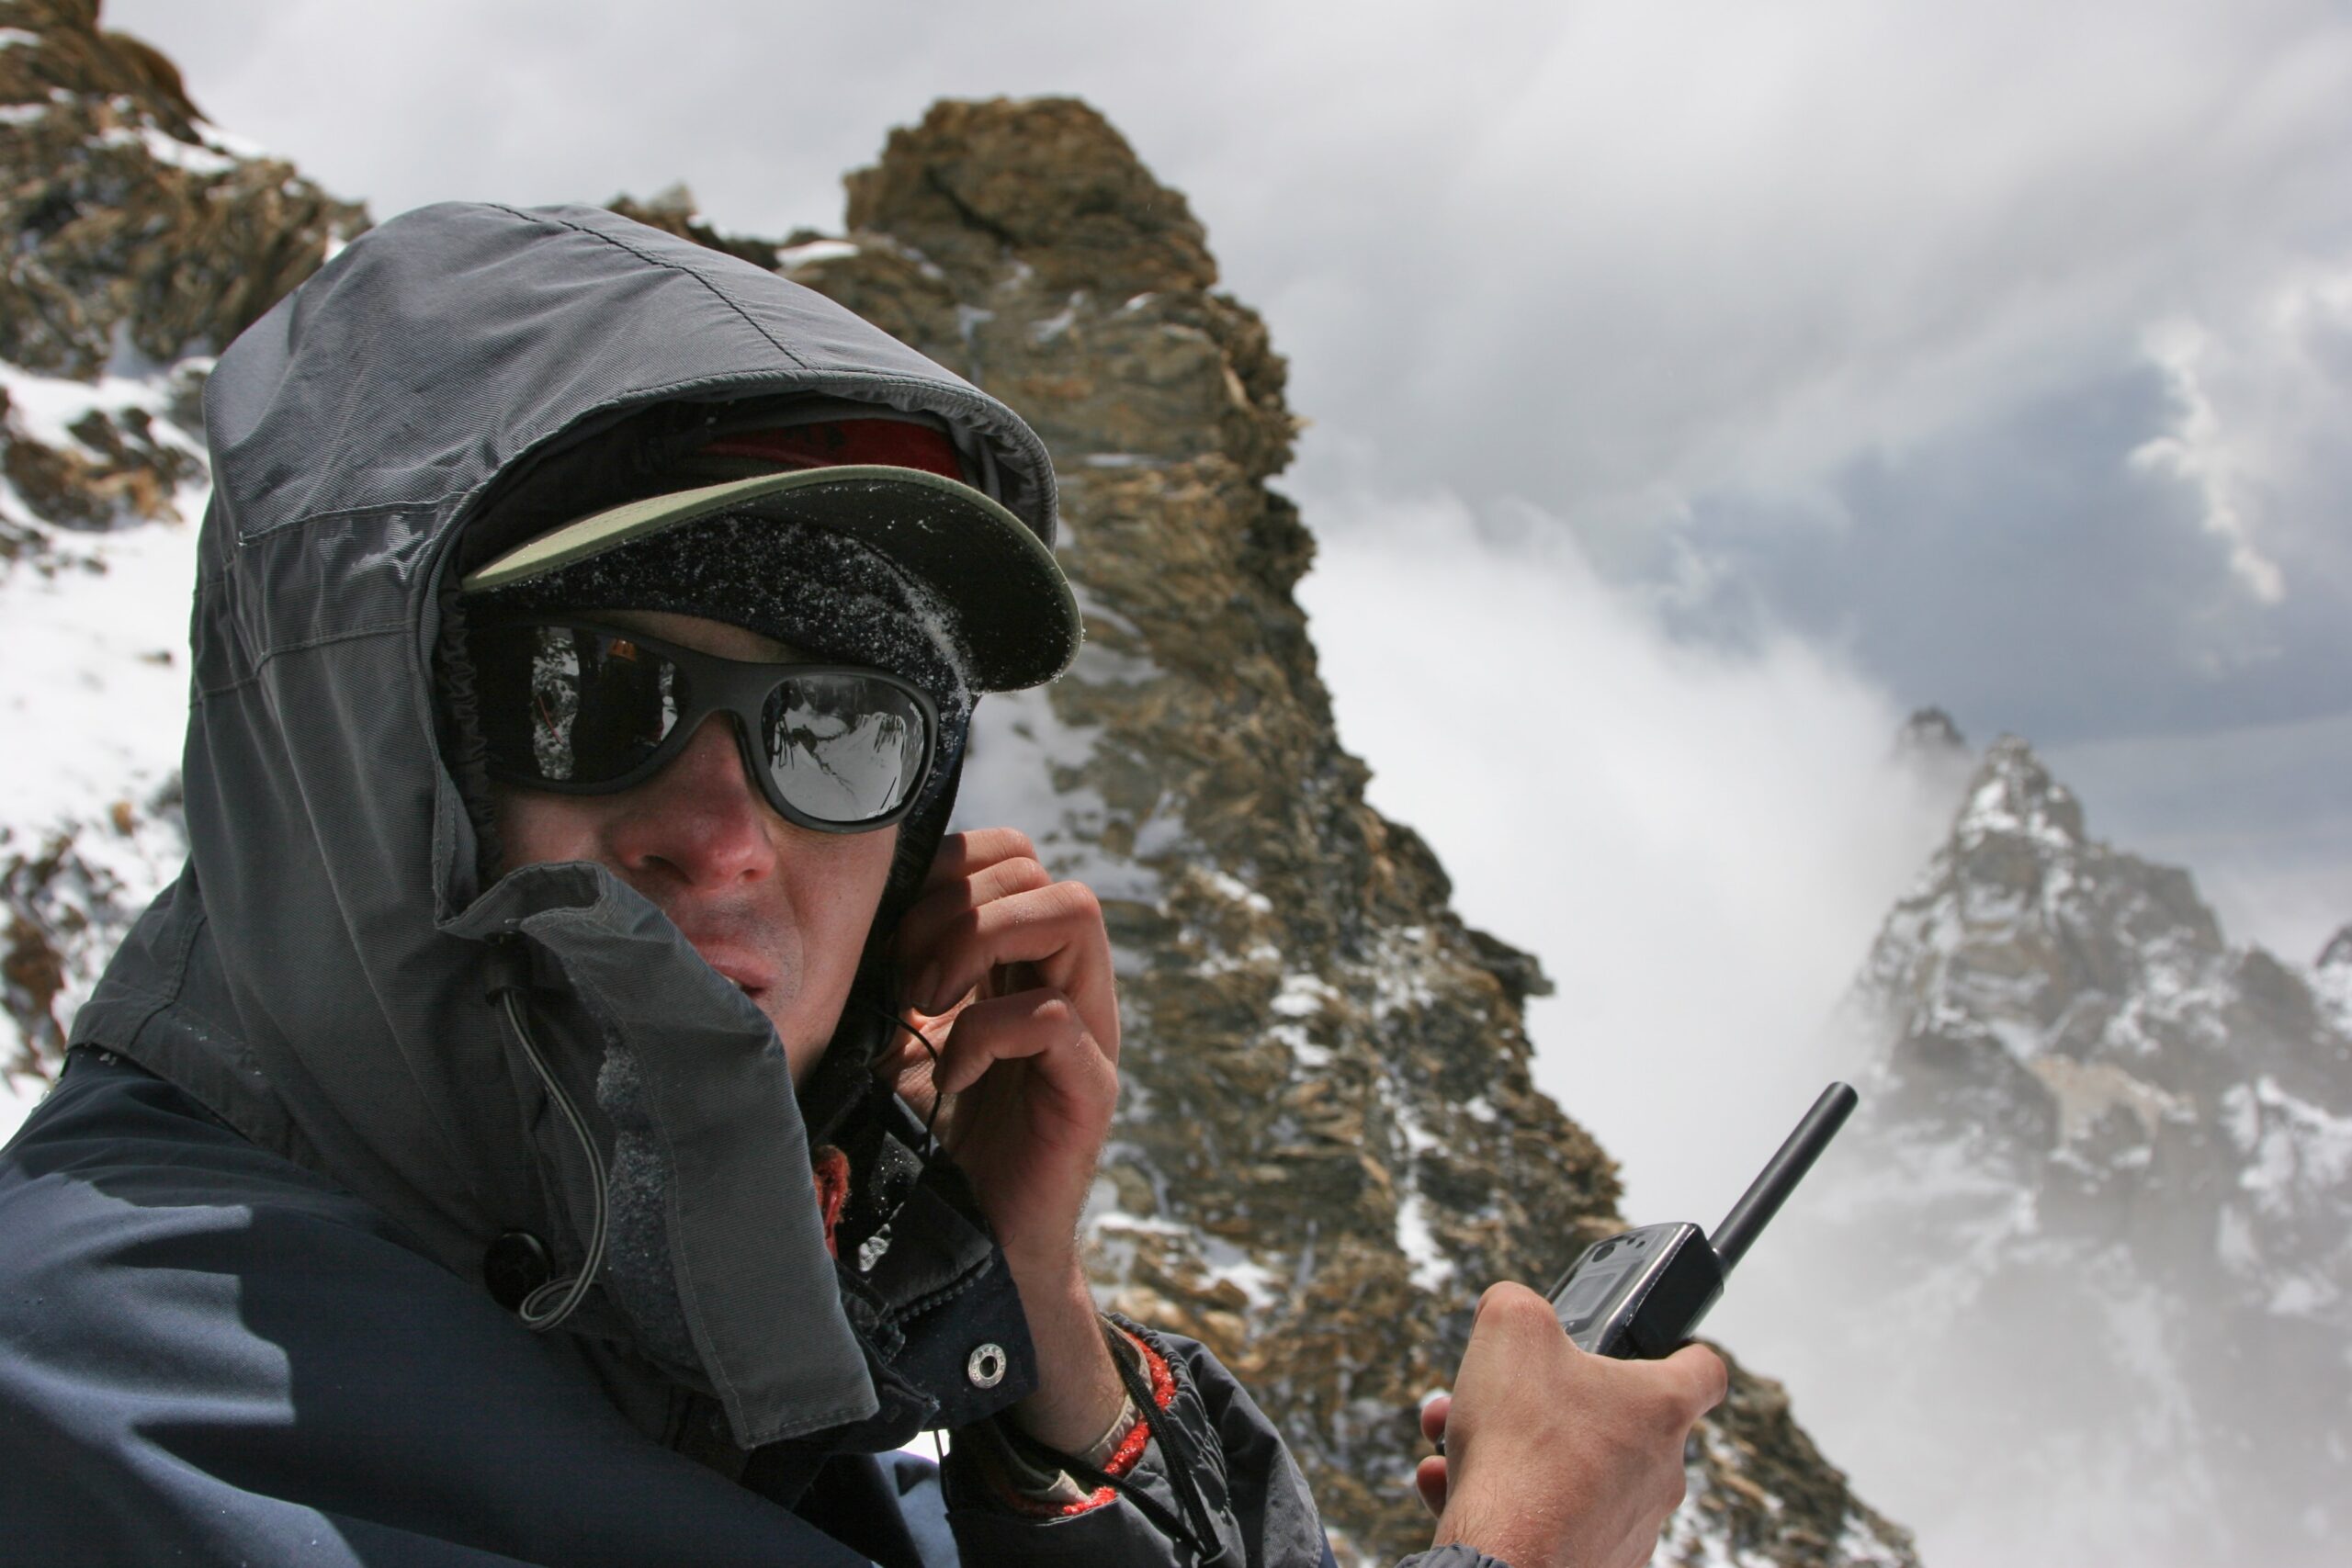 Man using a two way radios in a remote area